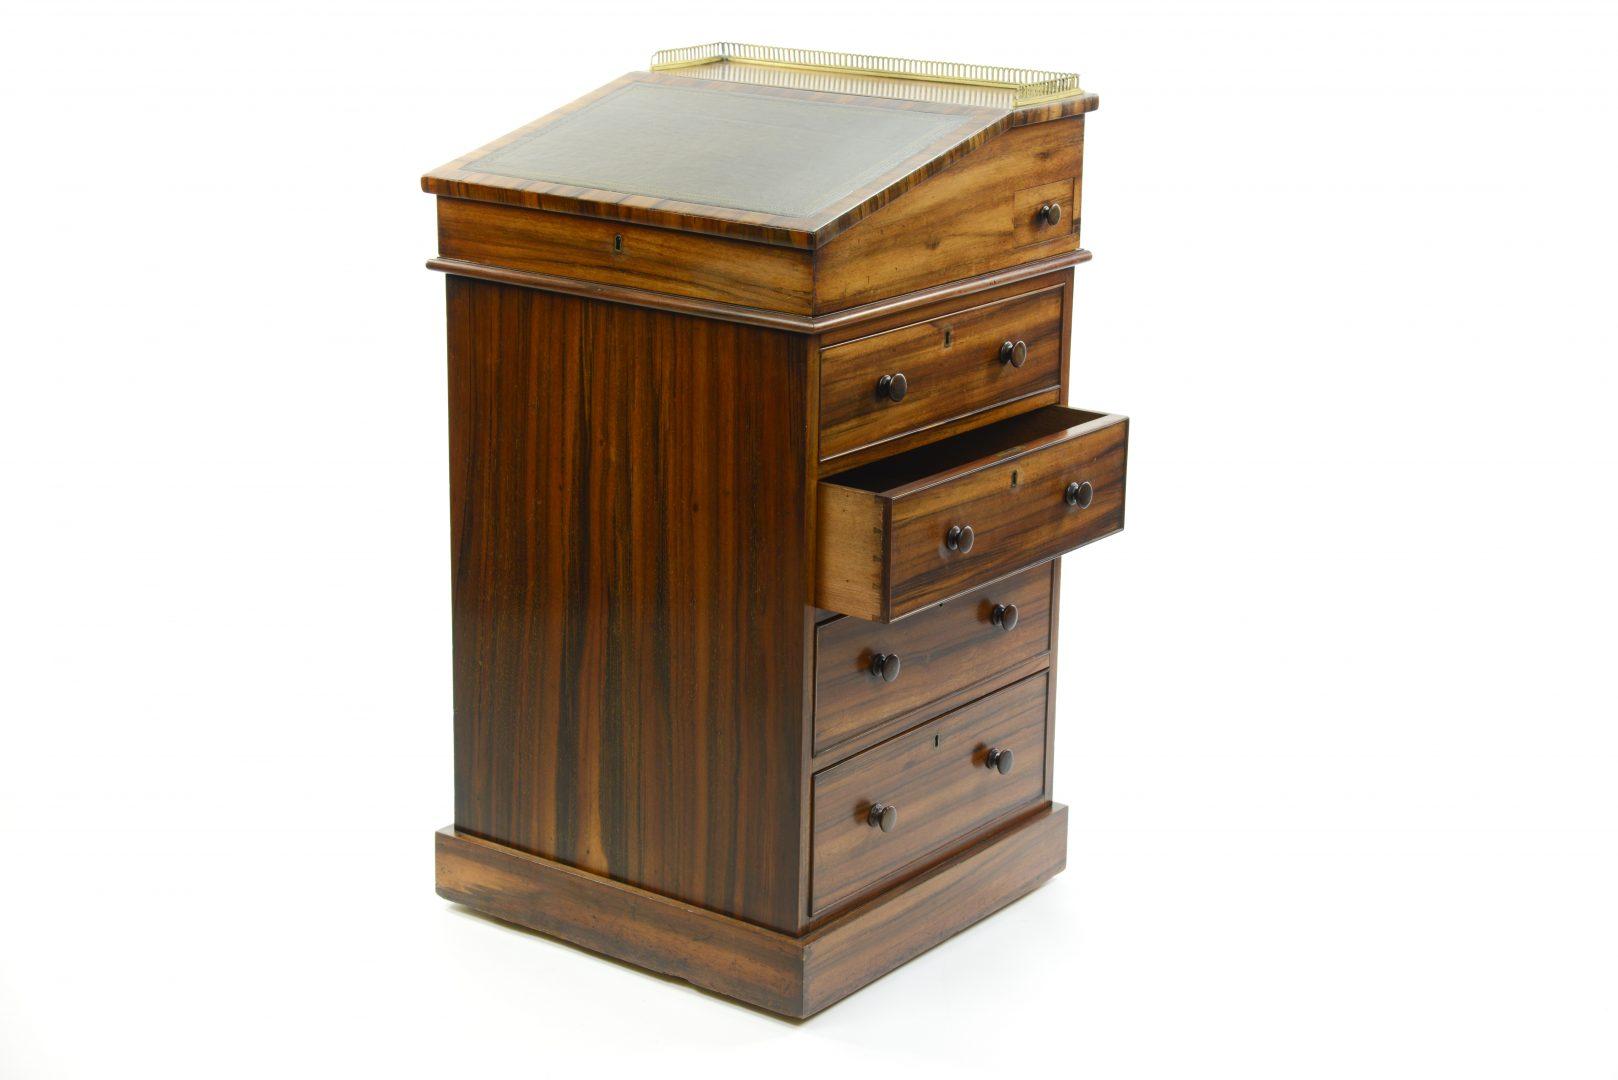 A Regency rosewood davenport by Miles and Edwards, possibly made by Gillows and retailed by Miles and Edwards it carries a signature from Miles and Edwards. During the regency period many of the smaller furniture manufacturers would purchas items